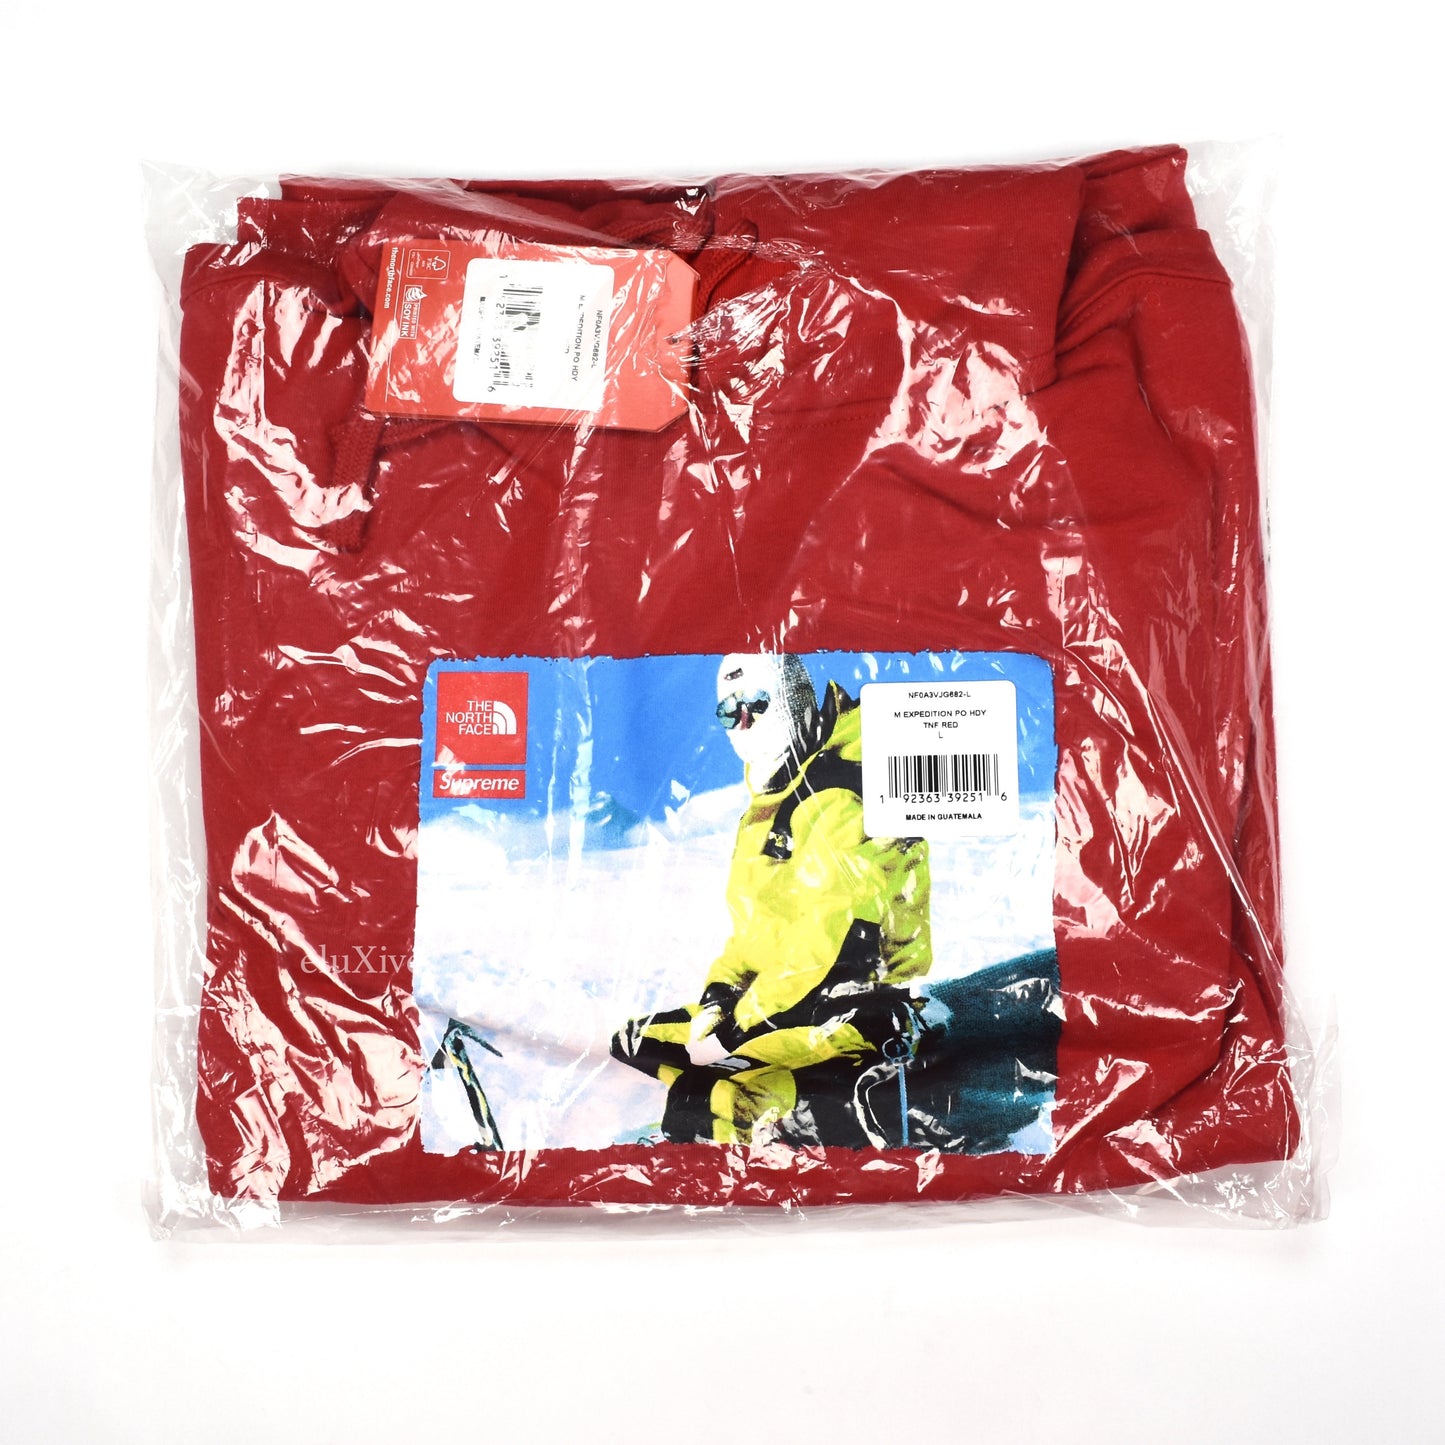 Supreme x The North Face - Red Photo Logo Hoodie